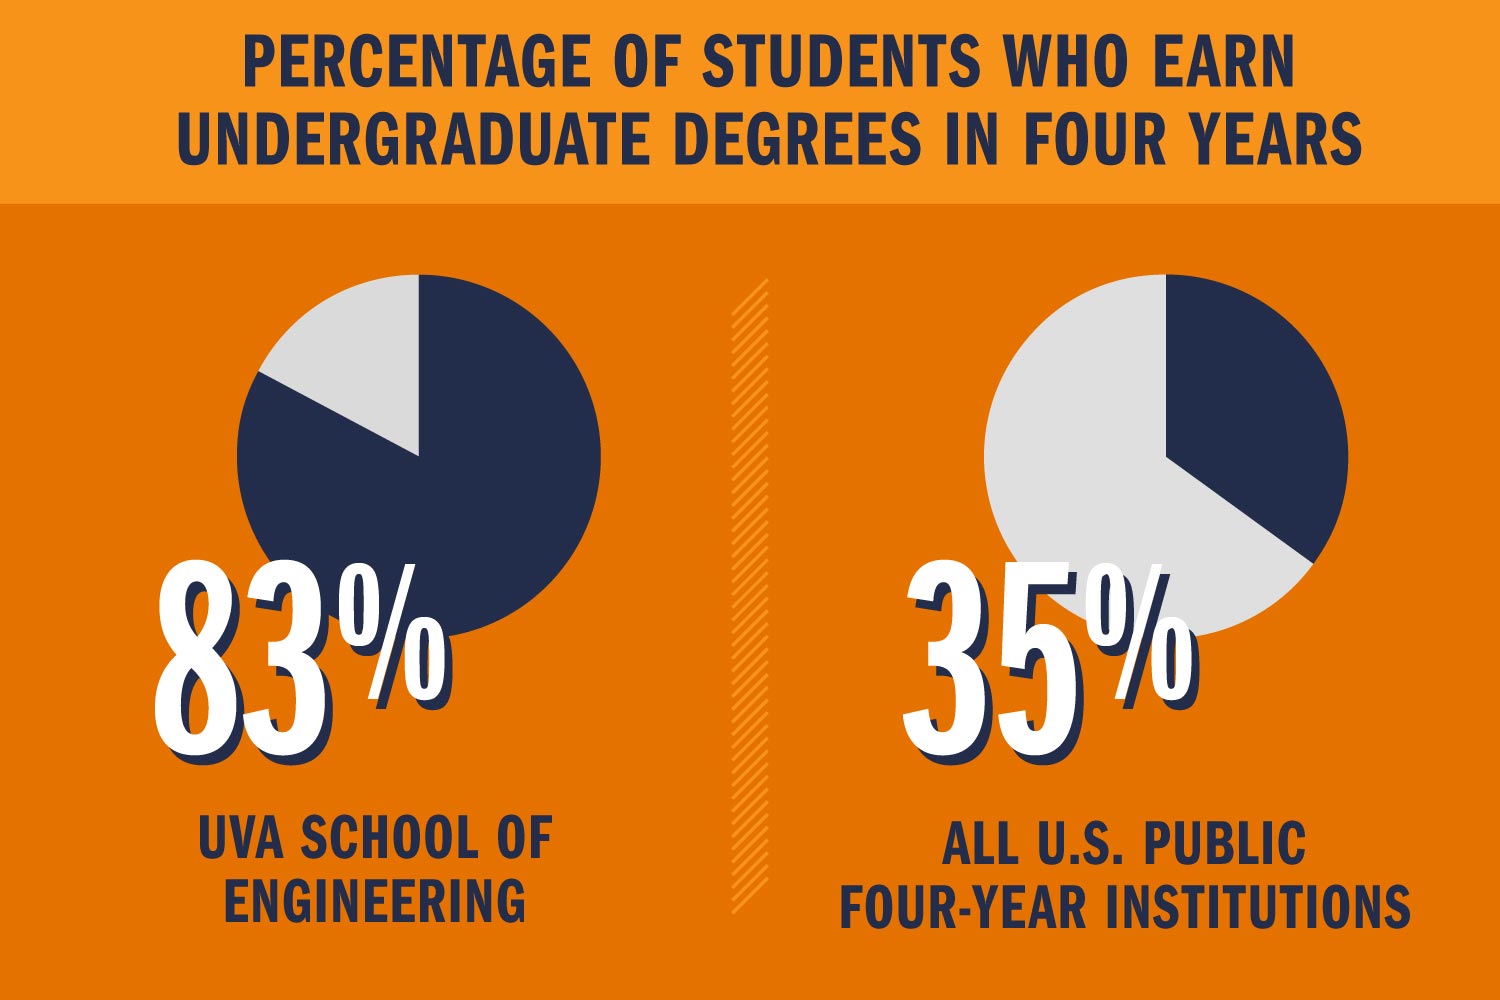 Percentage of students who earn undergraduate degrees in four years. UVA School of Engineering: 83 percent. All U.S. public four-year institutions: 35 percent. 